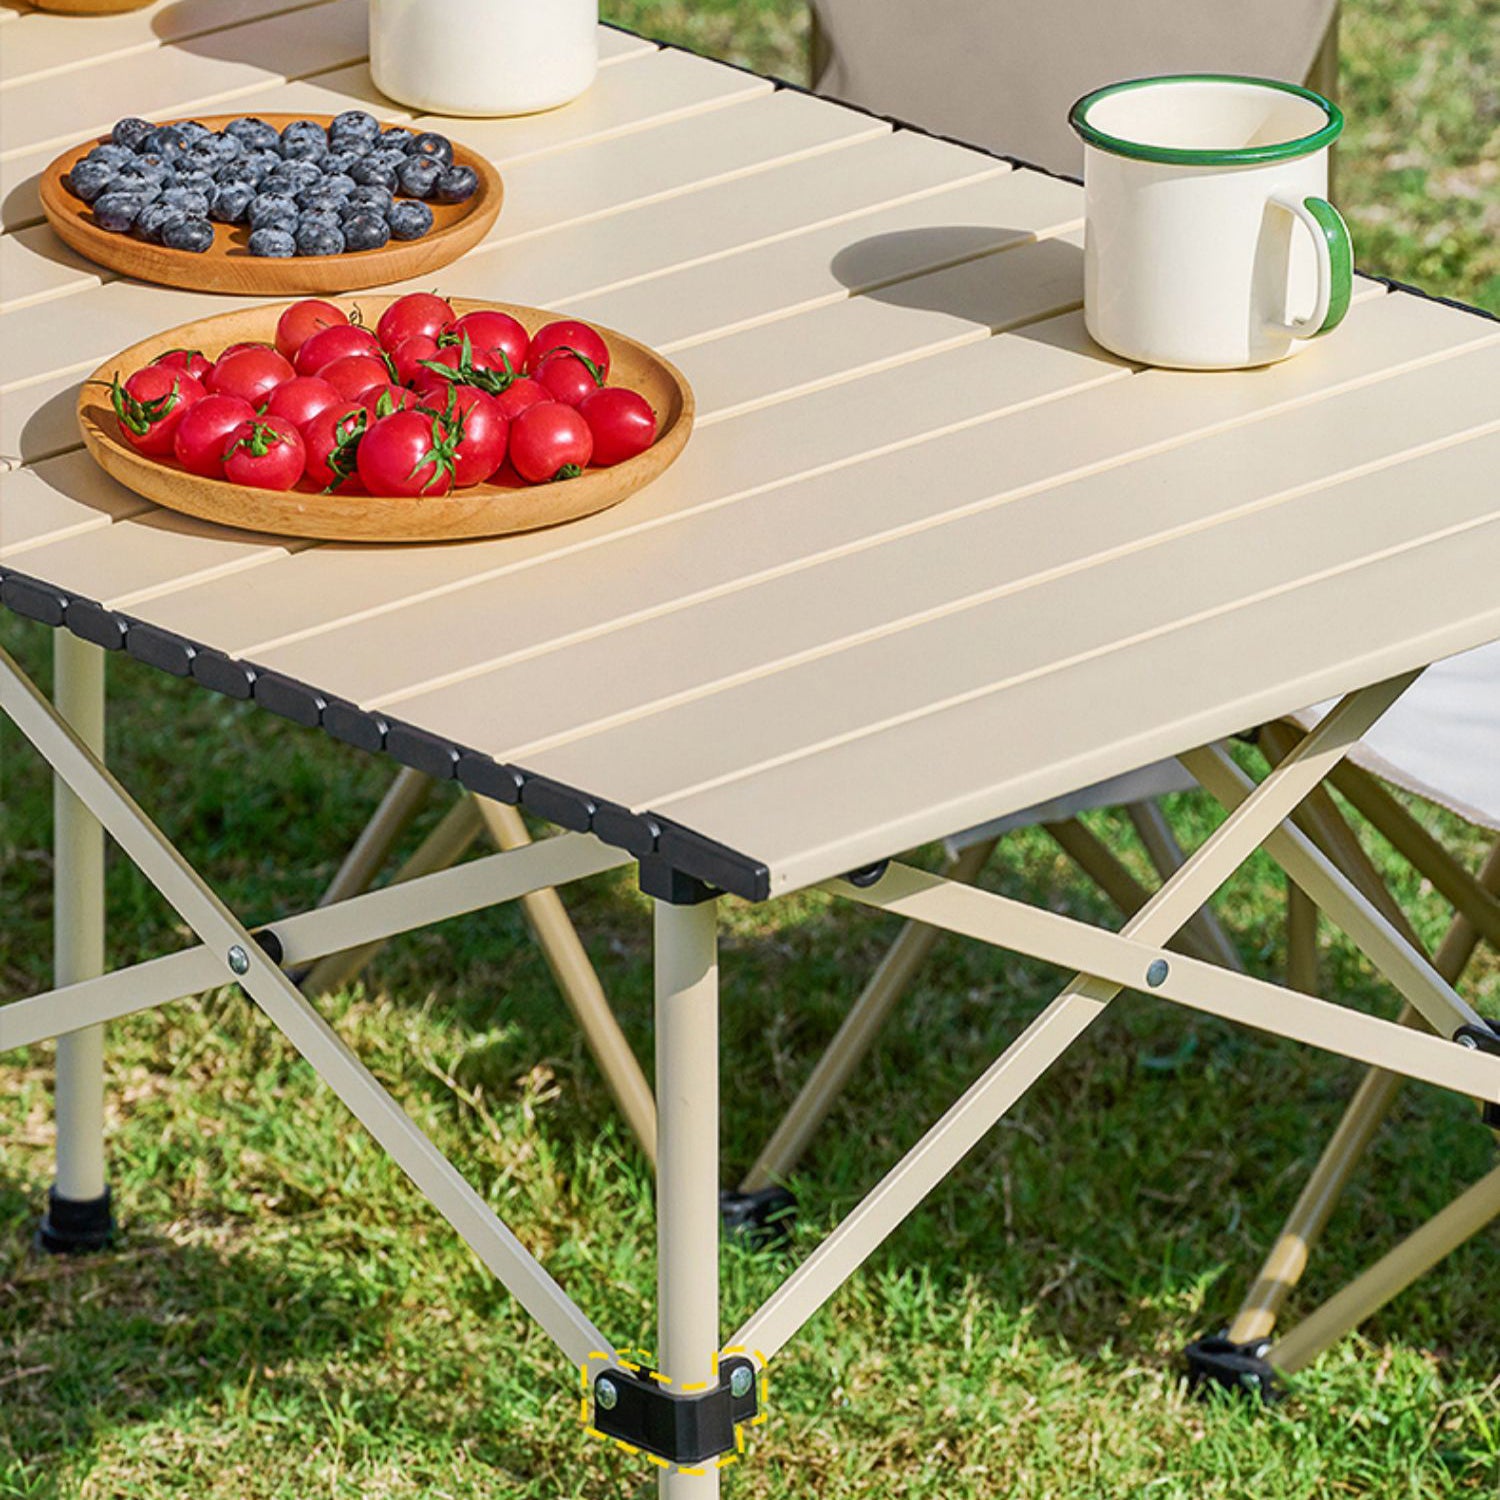 Steel Outdoor Folding Table Industrial UV Resistant Camping Table